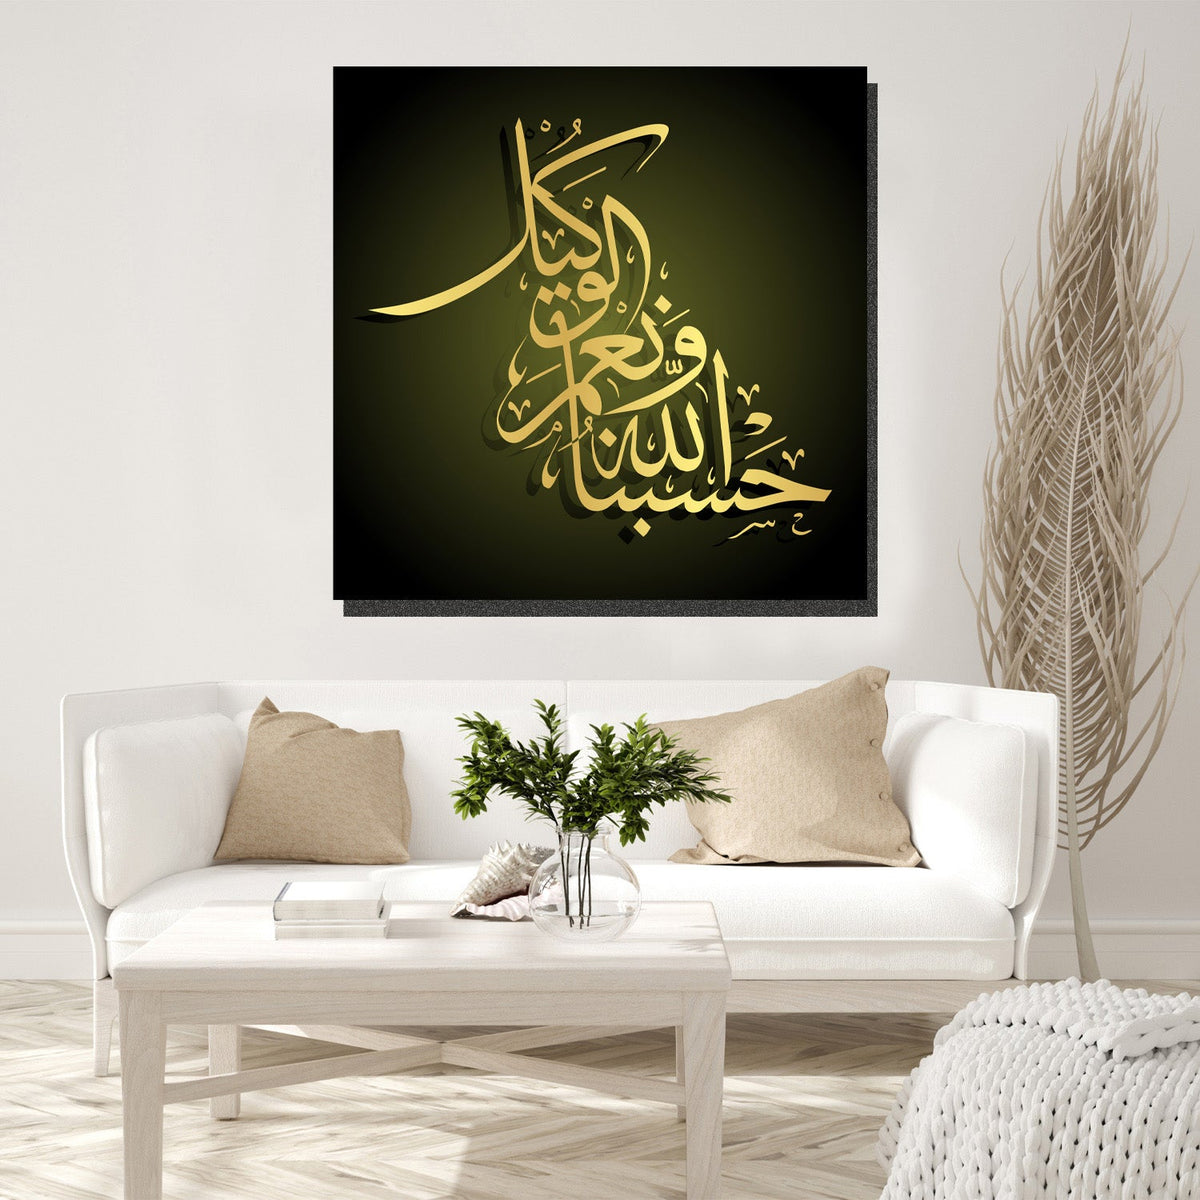 https://cdn.shopify.com/s/files/1/0387/9986/8044/products/IslamicArtLimitedEdition19CanvasArtprintStretched-1.jpg